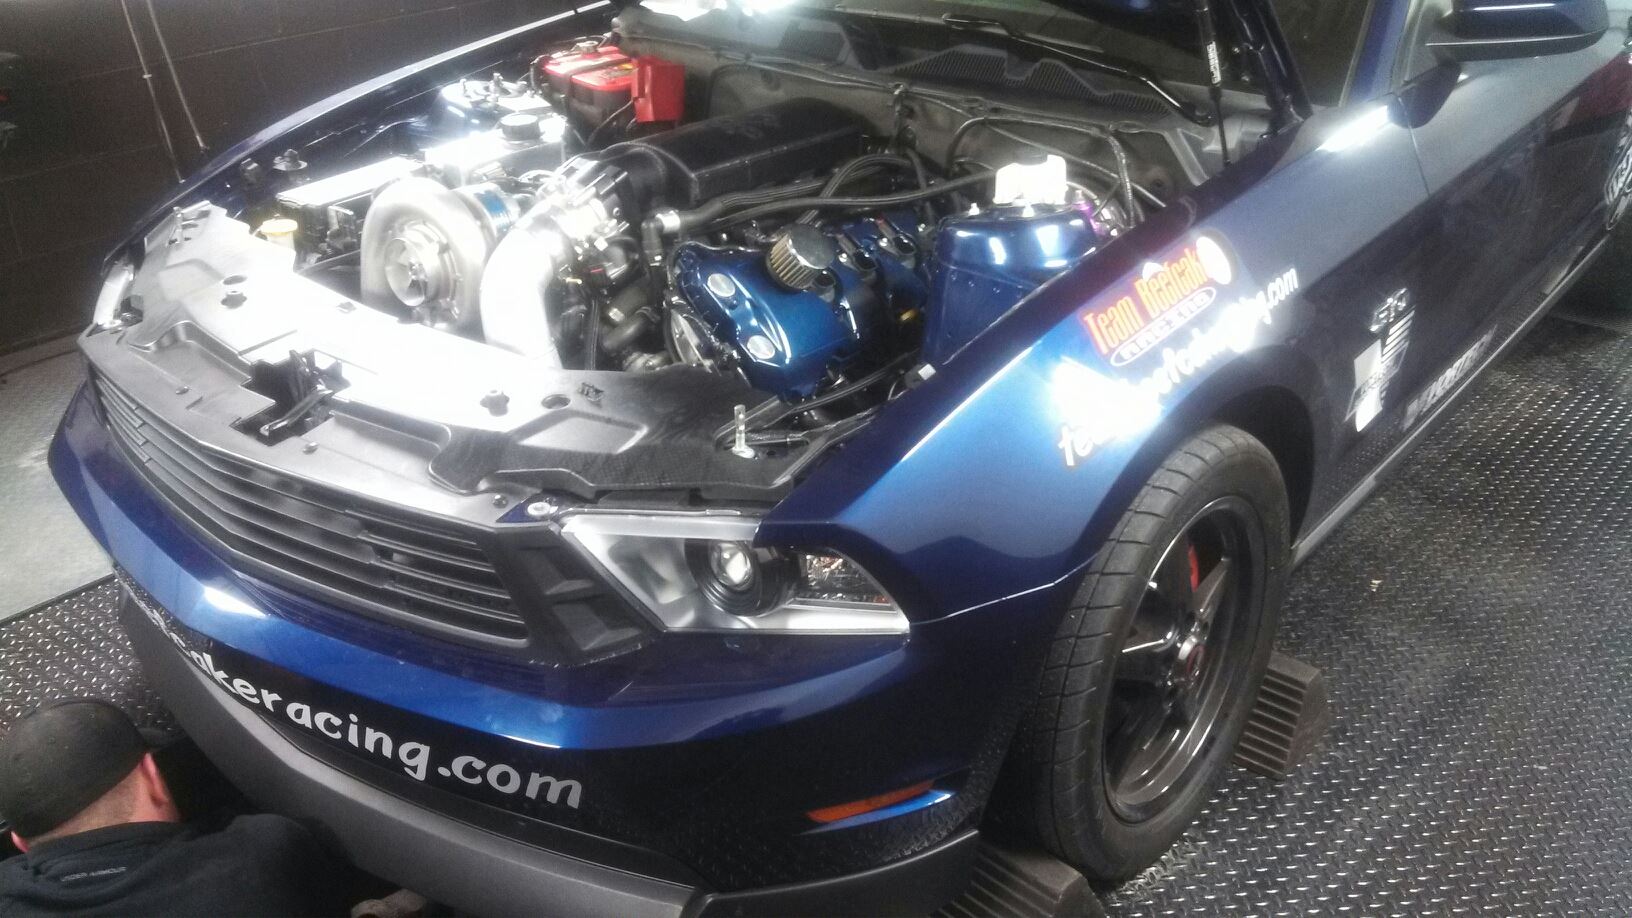 Beefcake Ups the Ante for 2013 Season with Nearly 1100 rwhp